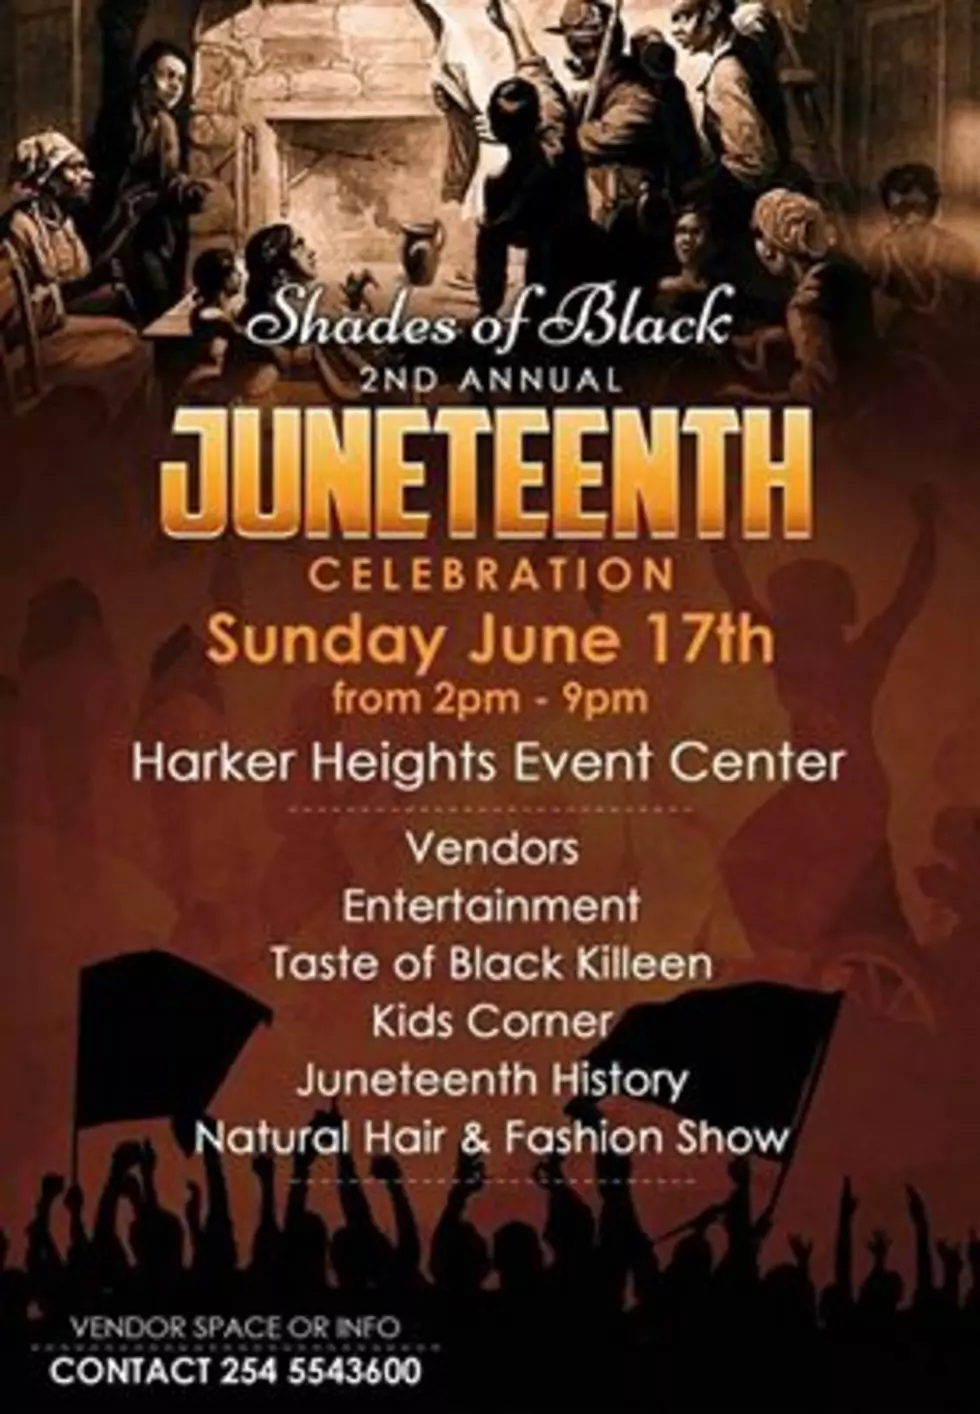 2nd Annual Juneteenth Celebration At Harker Heights Event Center